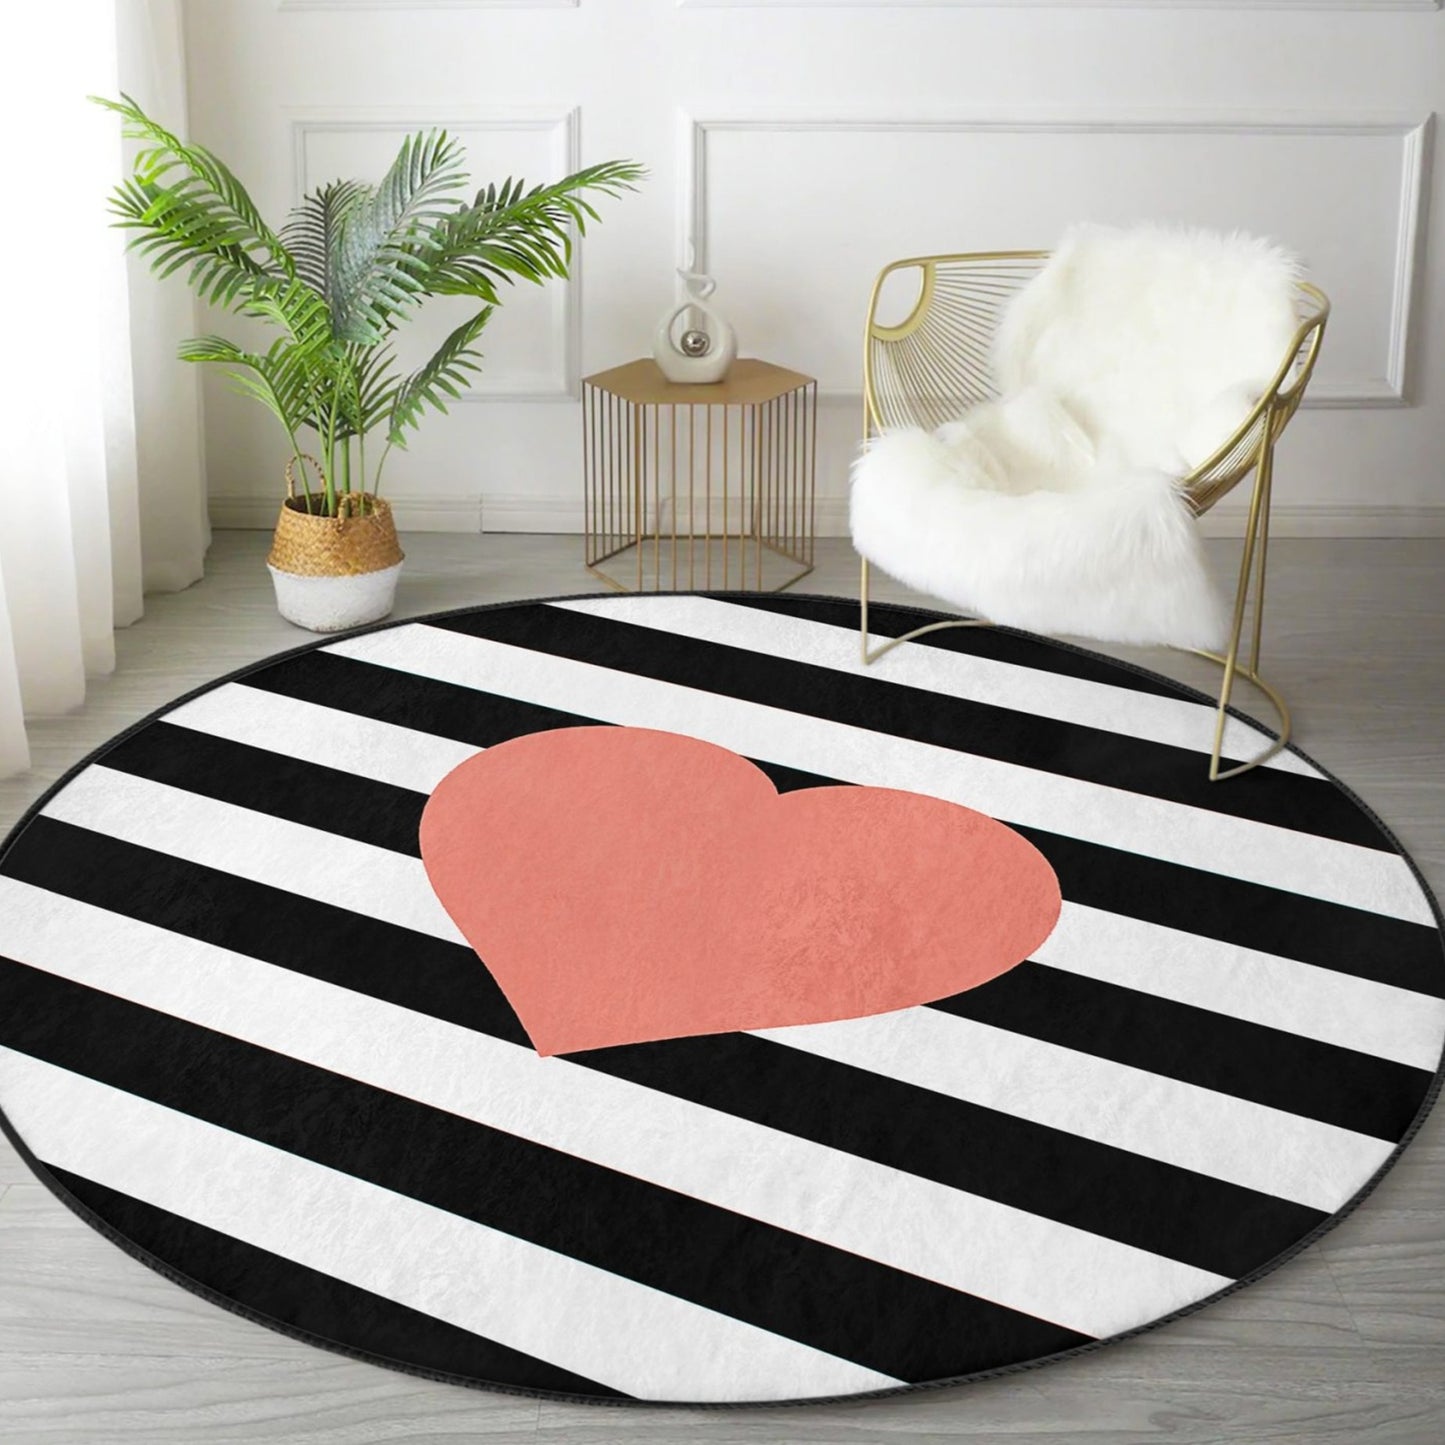 Chic Love Pattern Black and White Bedroom Washable Round Rug by Homeezone